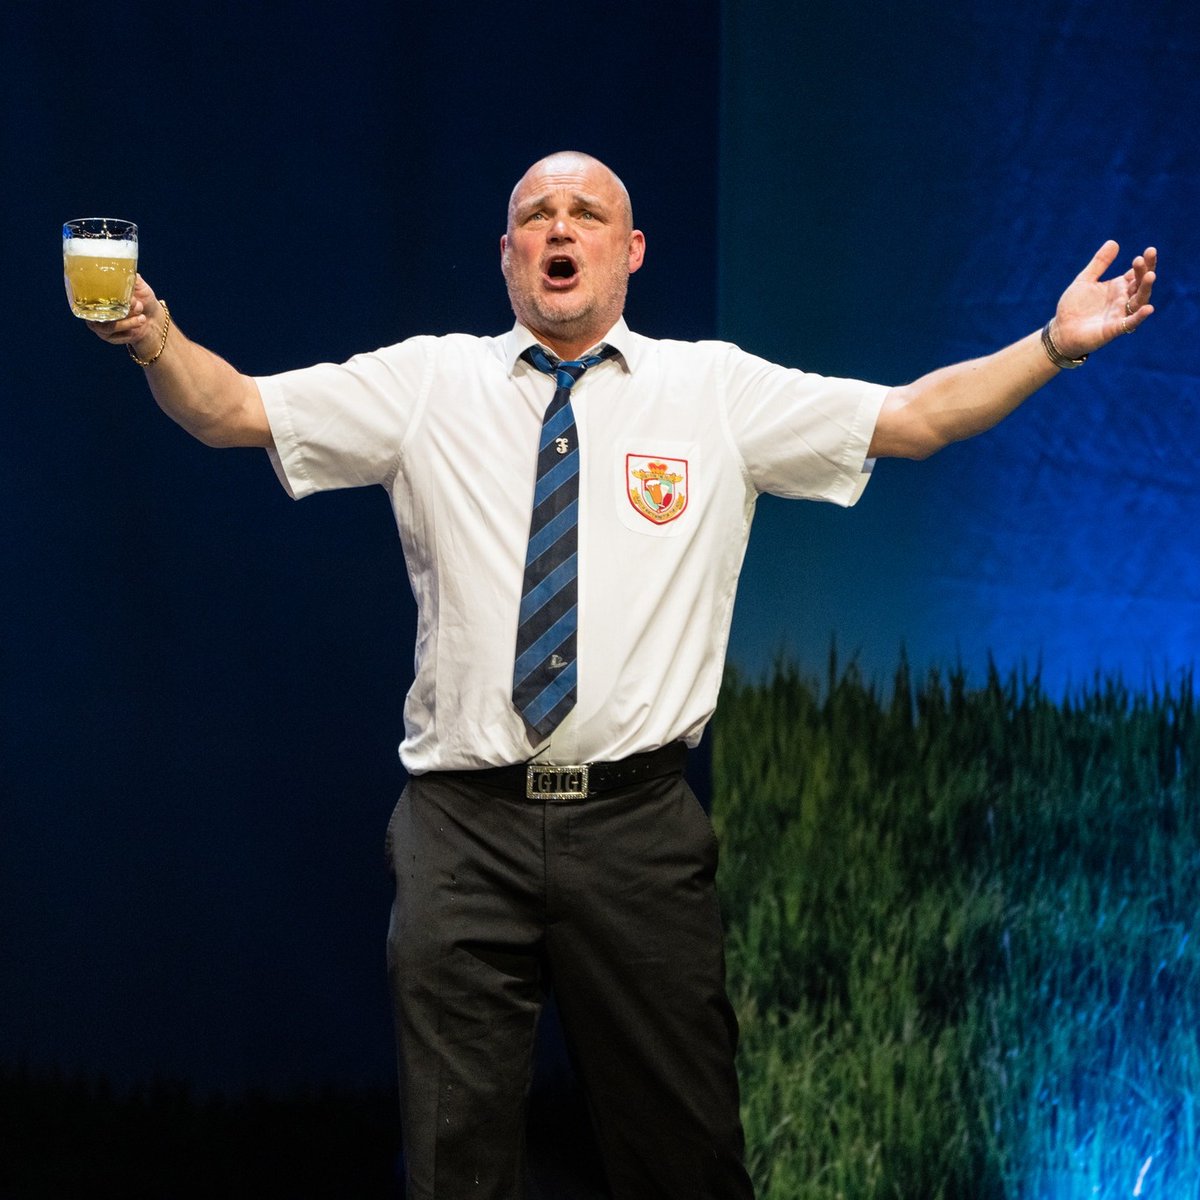 🍻 Standing up so you don't have to take it lying it down, @almurray is back at the Spa this Friday! 📸 ✍️ Meet & Greet tickets are available to meet the King of Beers before the show as well as the chance to get a photo and a signed postcard! 🎟️ tinyurl.com/4x7ckmv6